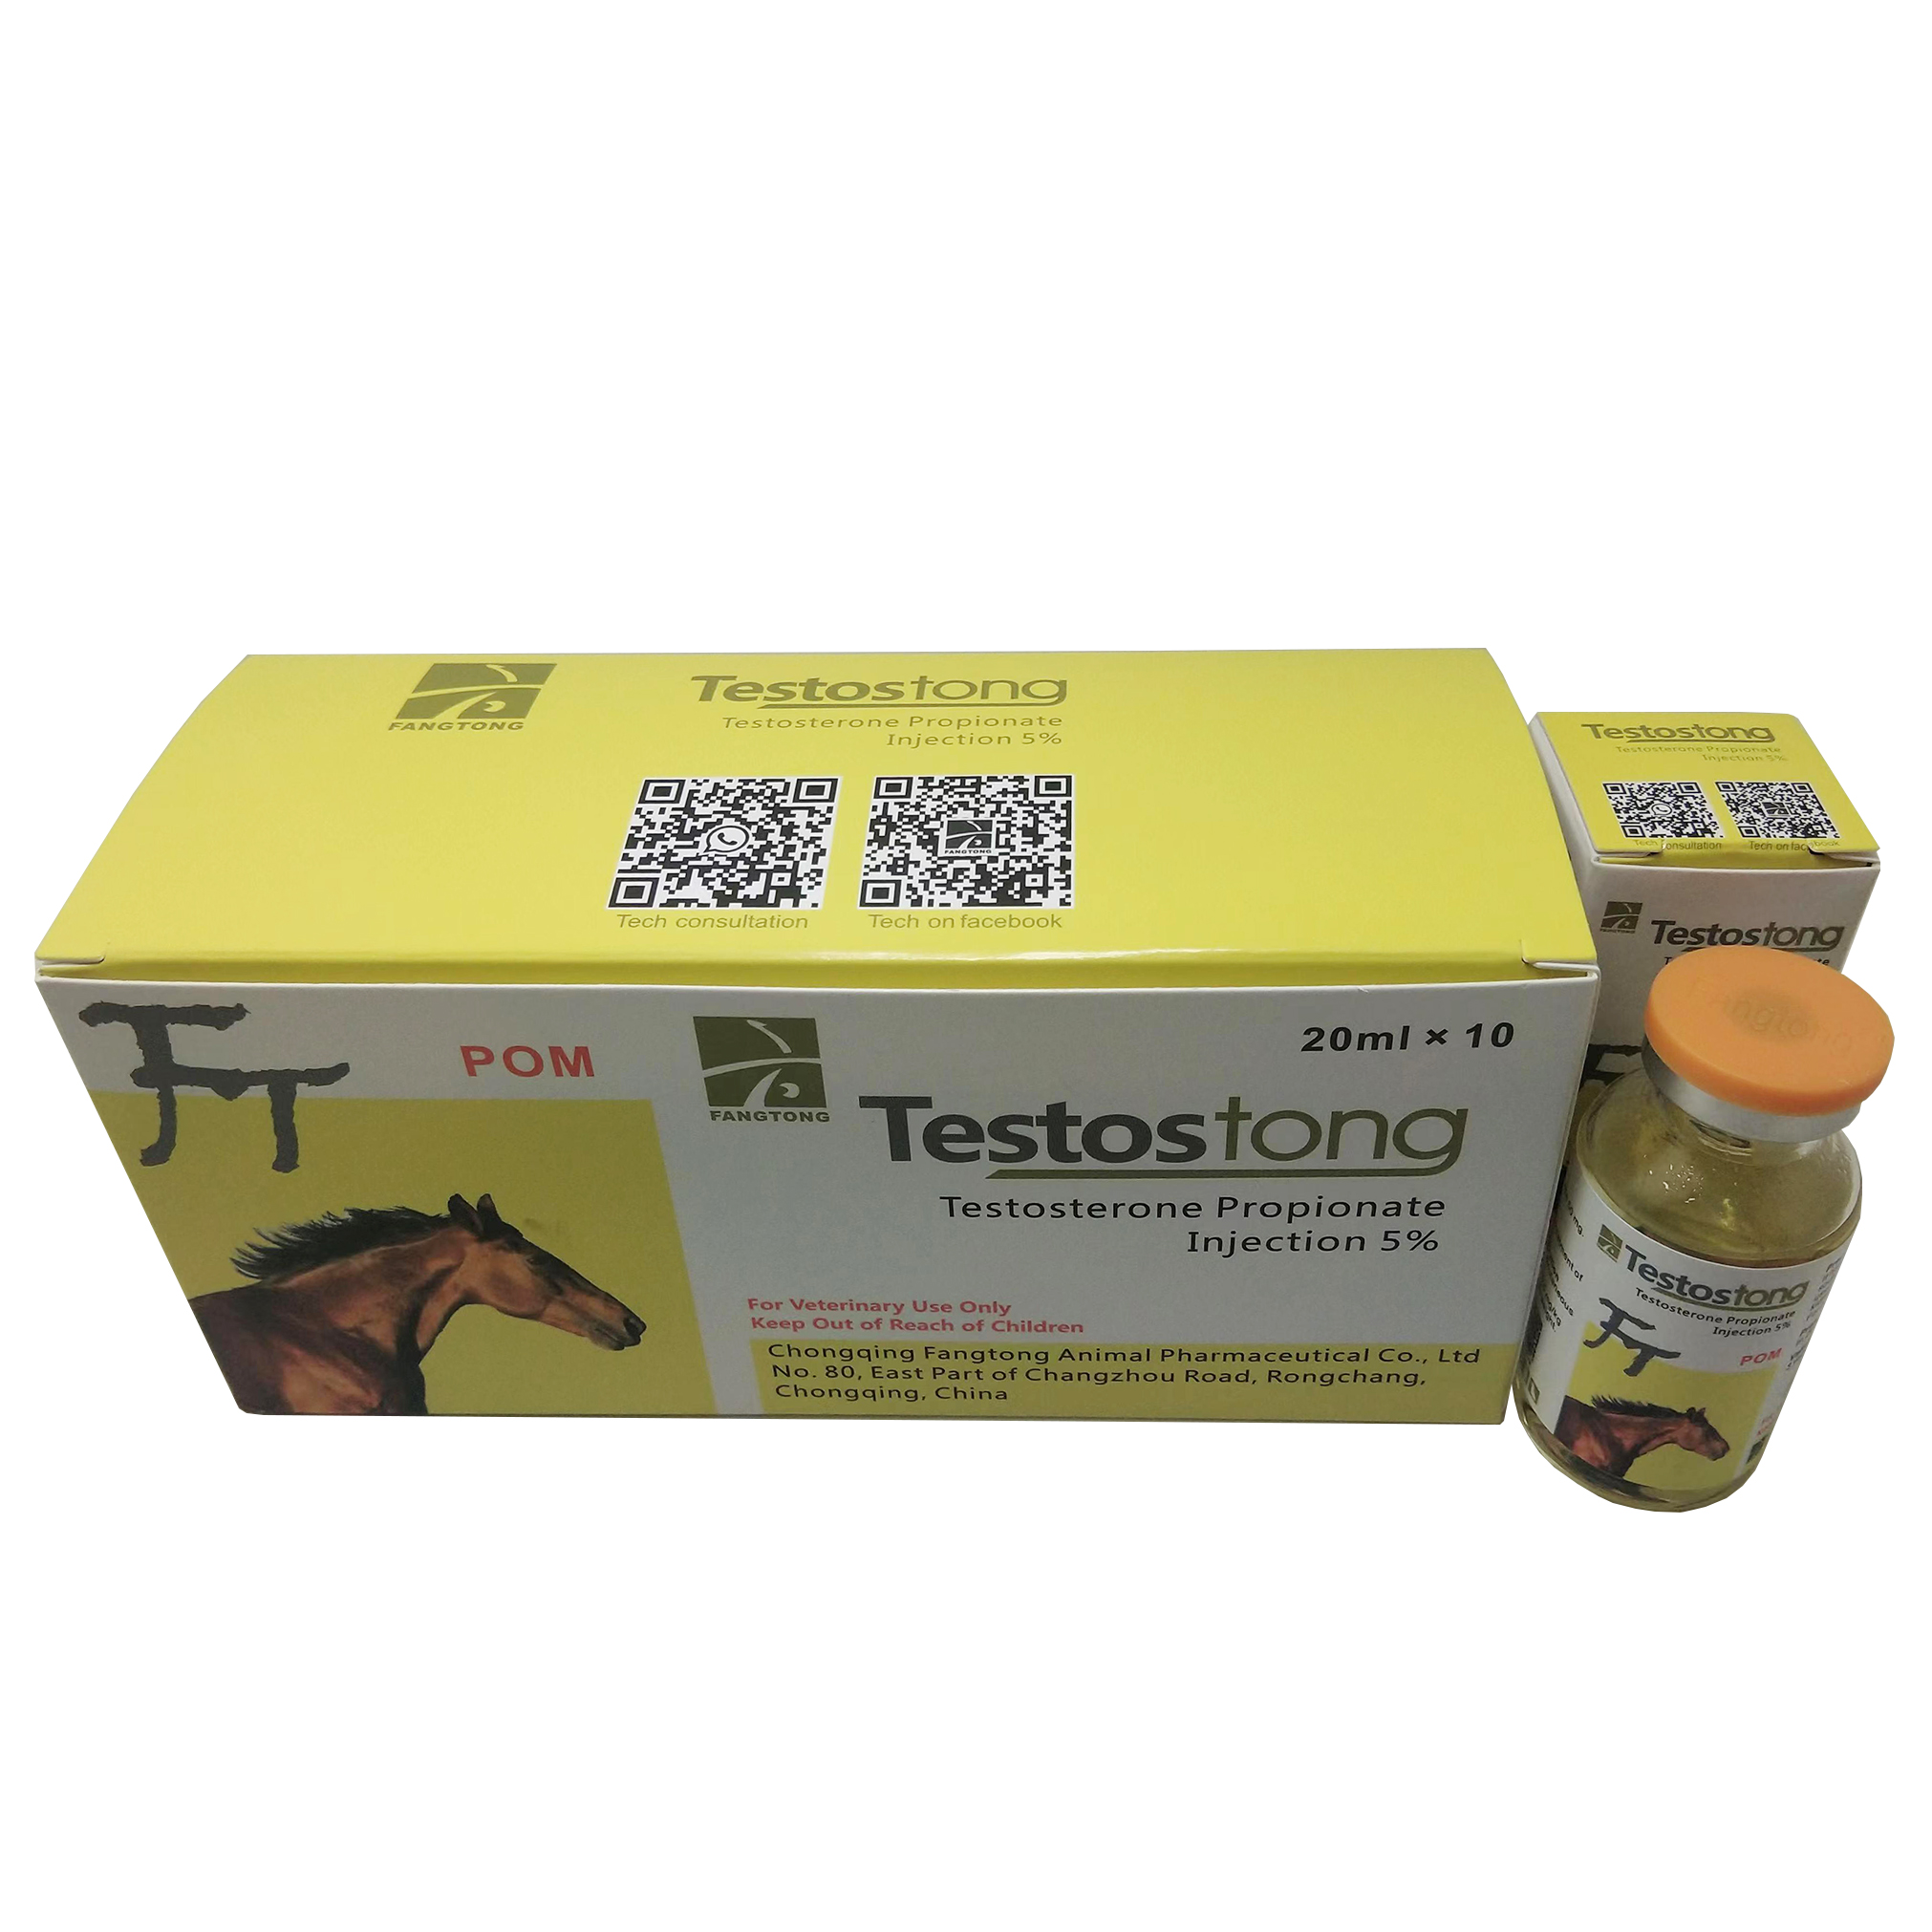 Testosterone Propionate Injection 5% Featured Image